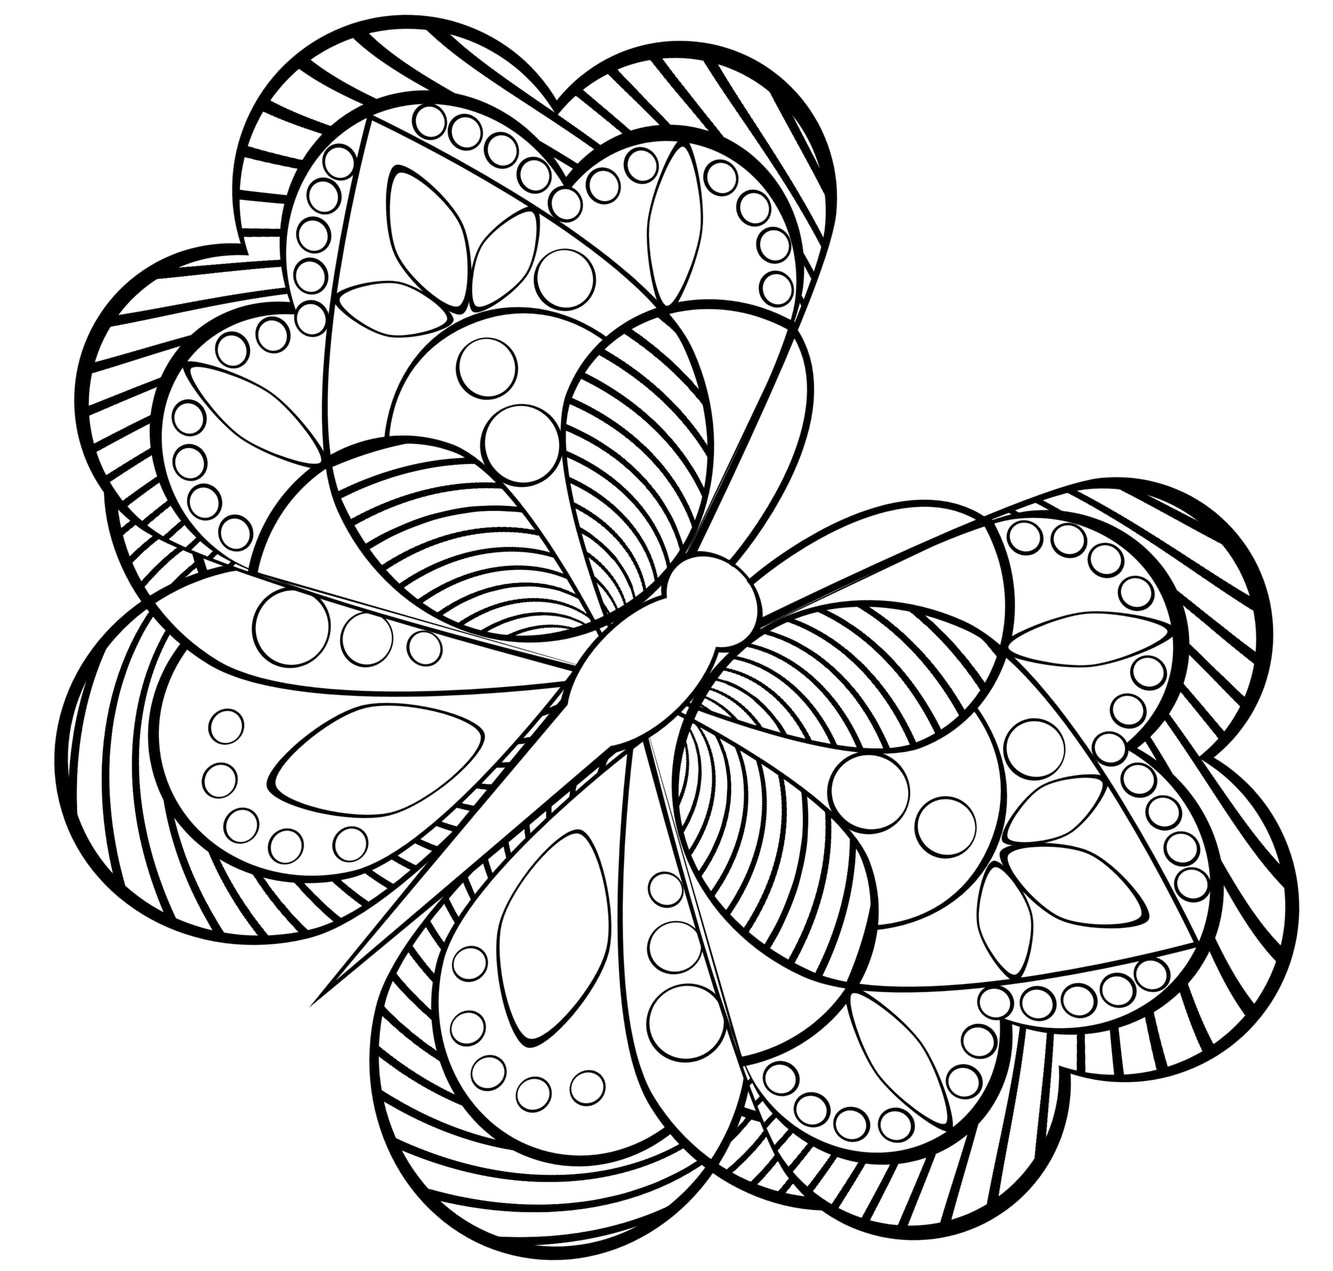 Printable Coloring Pages For Teens
 Best Free Printable Coloring Pages for Kids and Teens